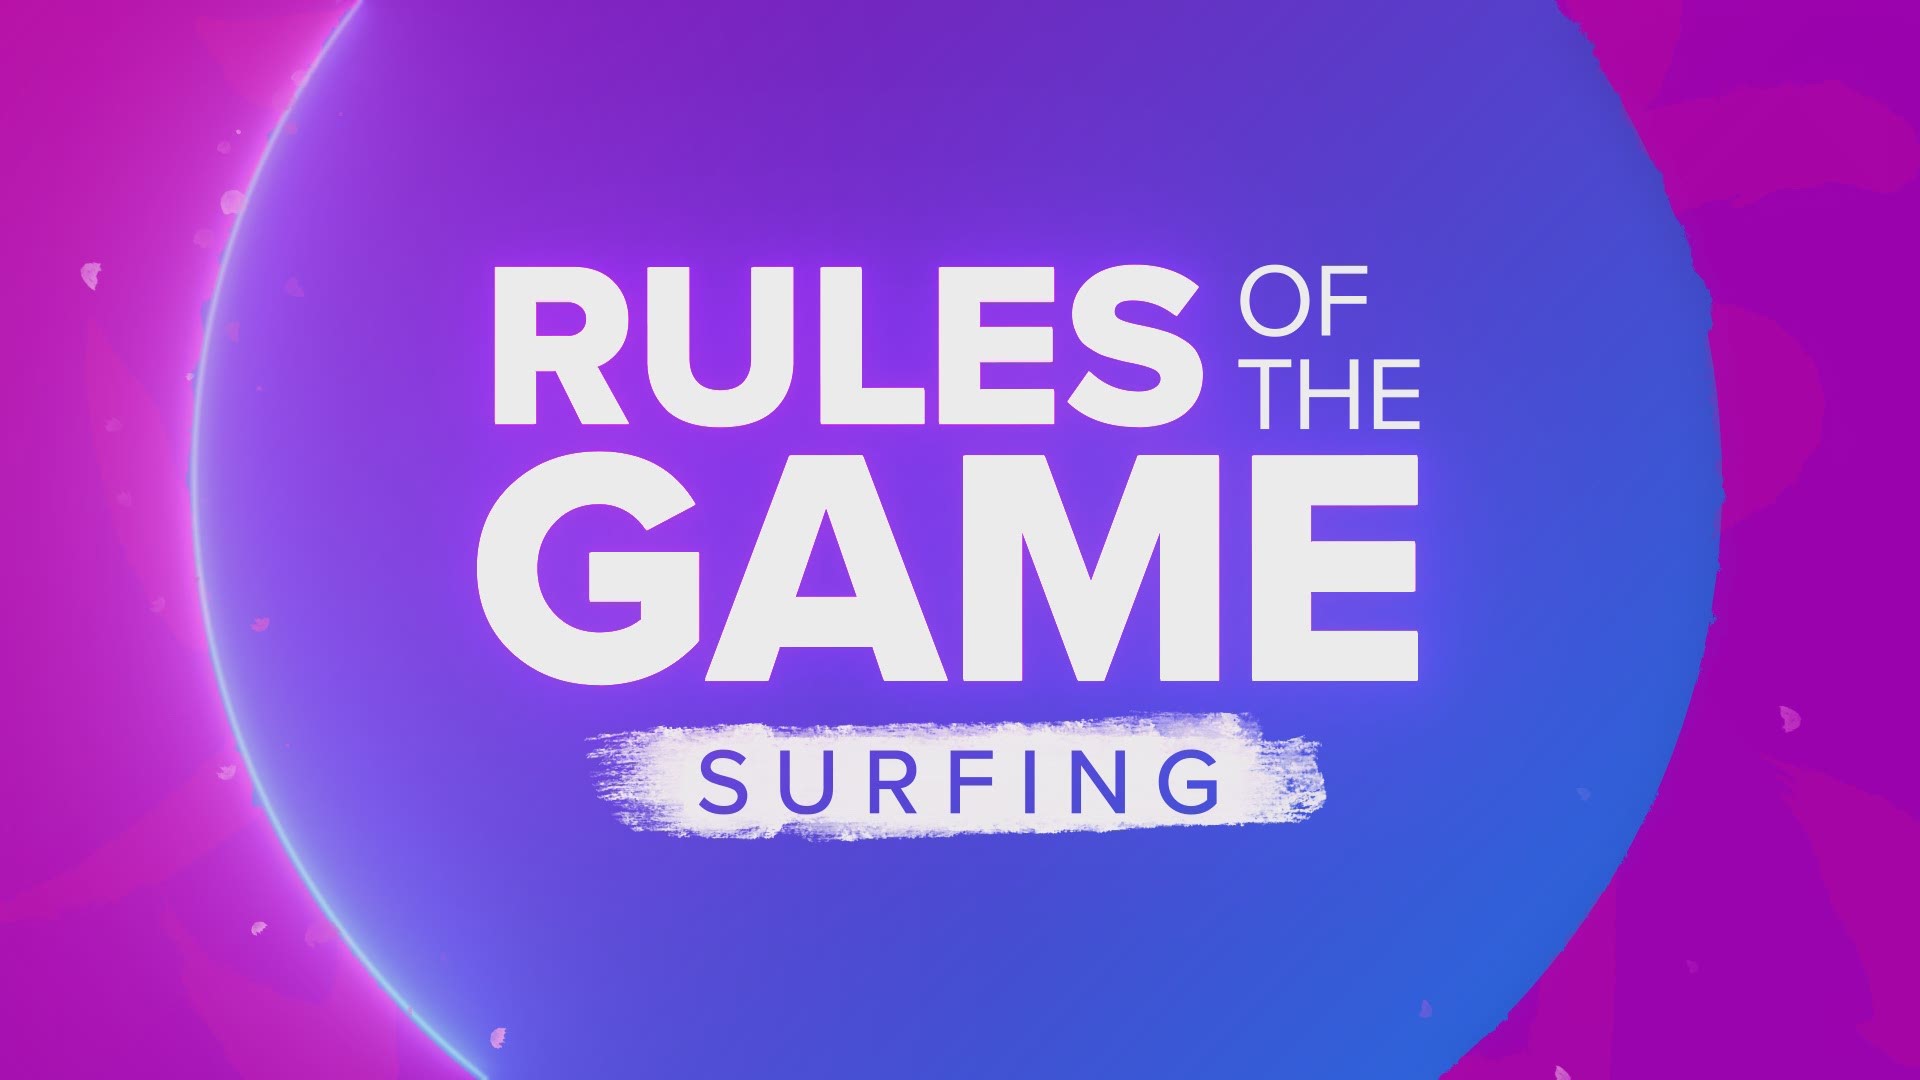 Surfing is one of the new competitions at the Olympics and requires a little help from Mother Nature.